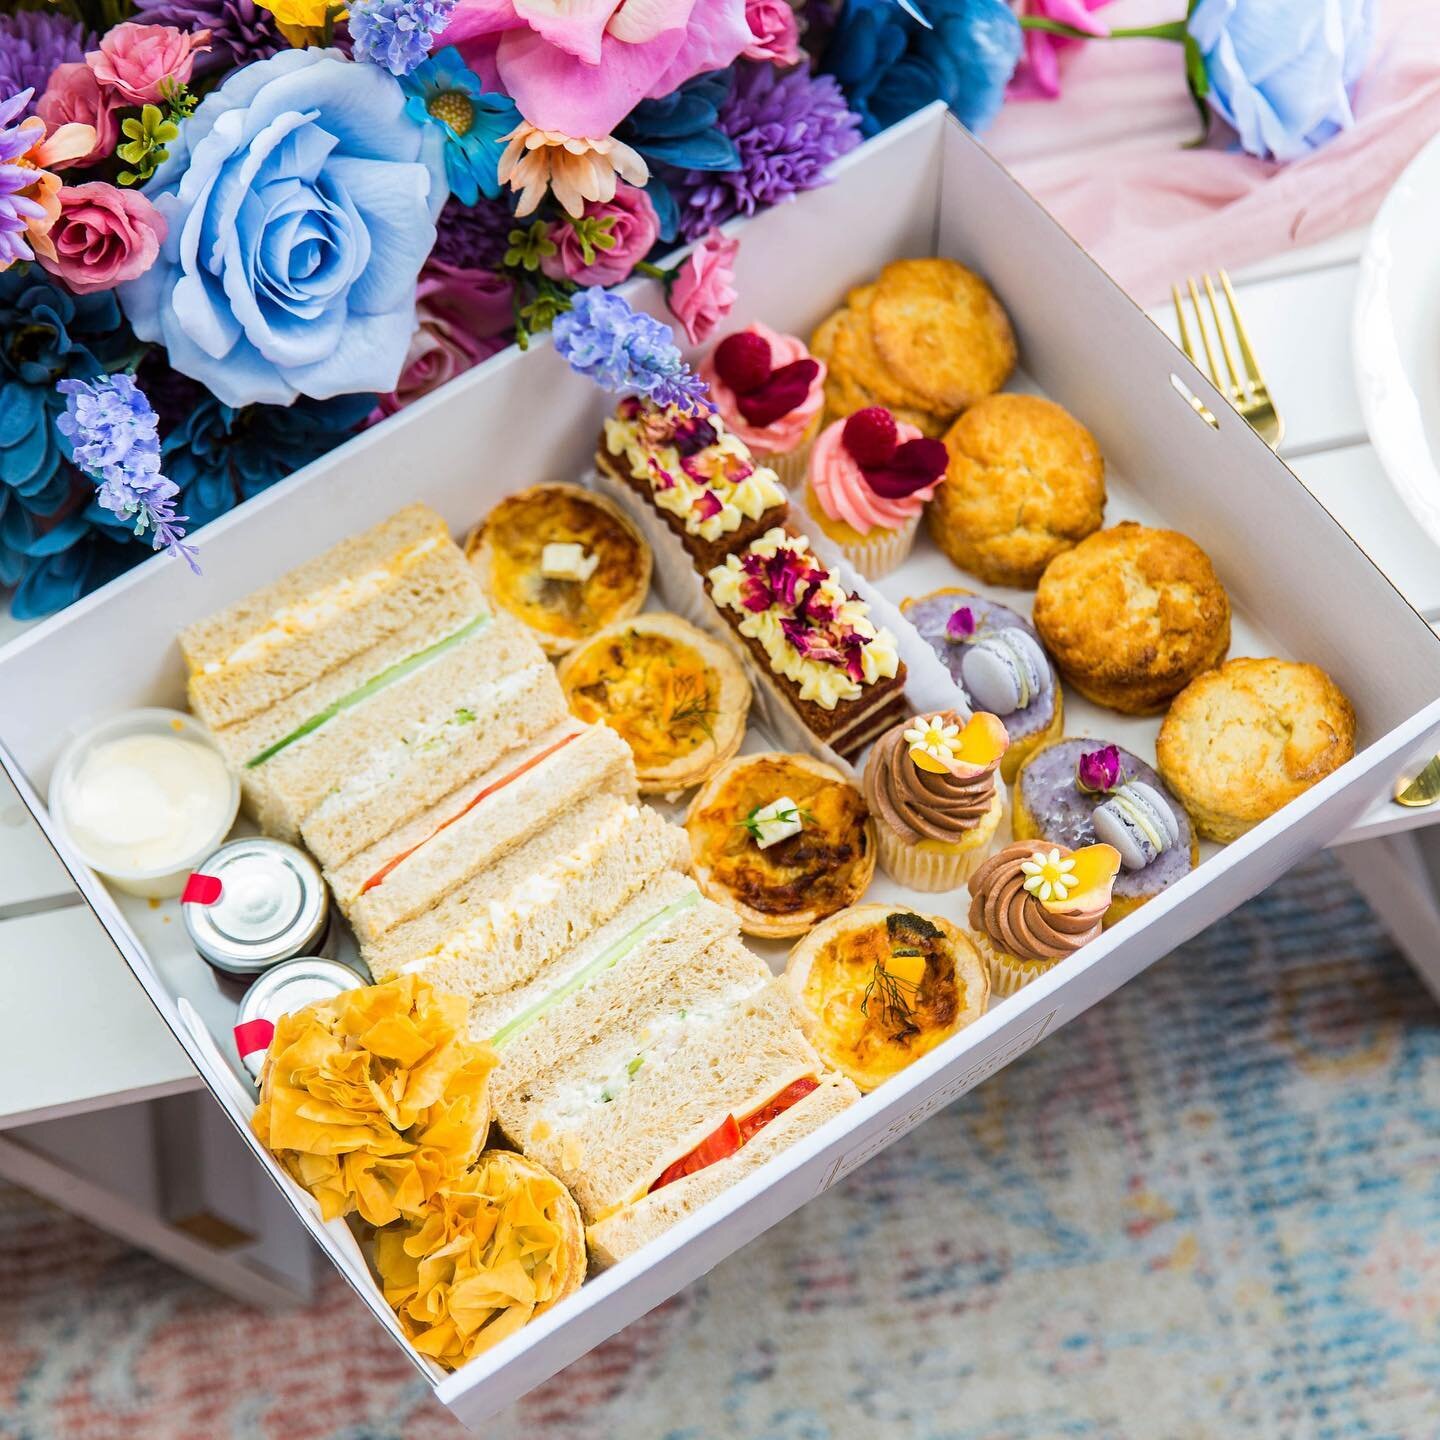 Limited edition Mother&rsquo;s Day high tea in a box! 🌷
This day is extra special to us at Collins Coffee House marking two years of hand crafting our beloved high tea boxes. This year we have created a limited edition high tea exclusively available